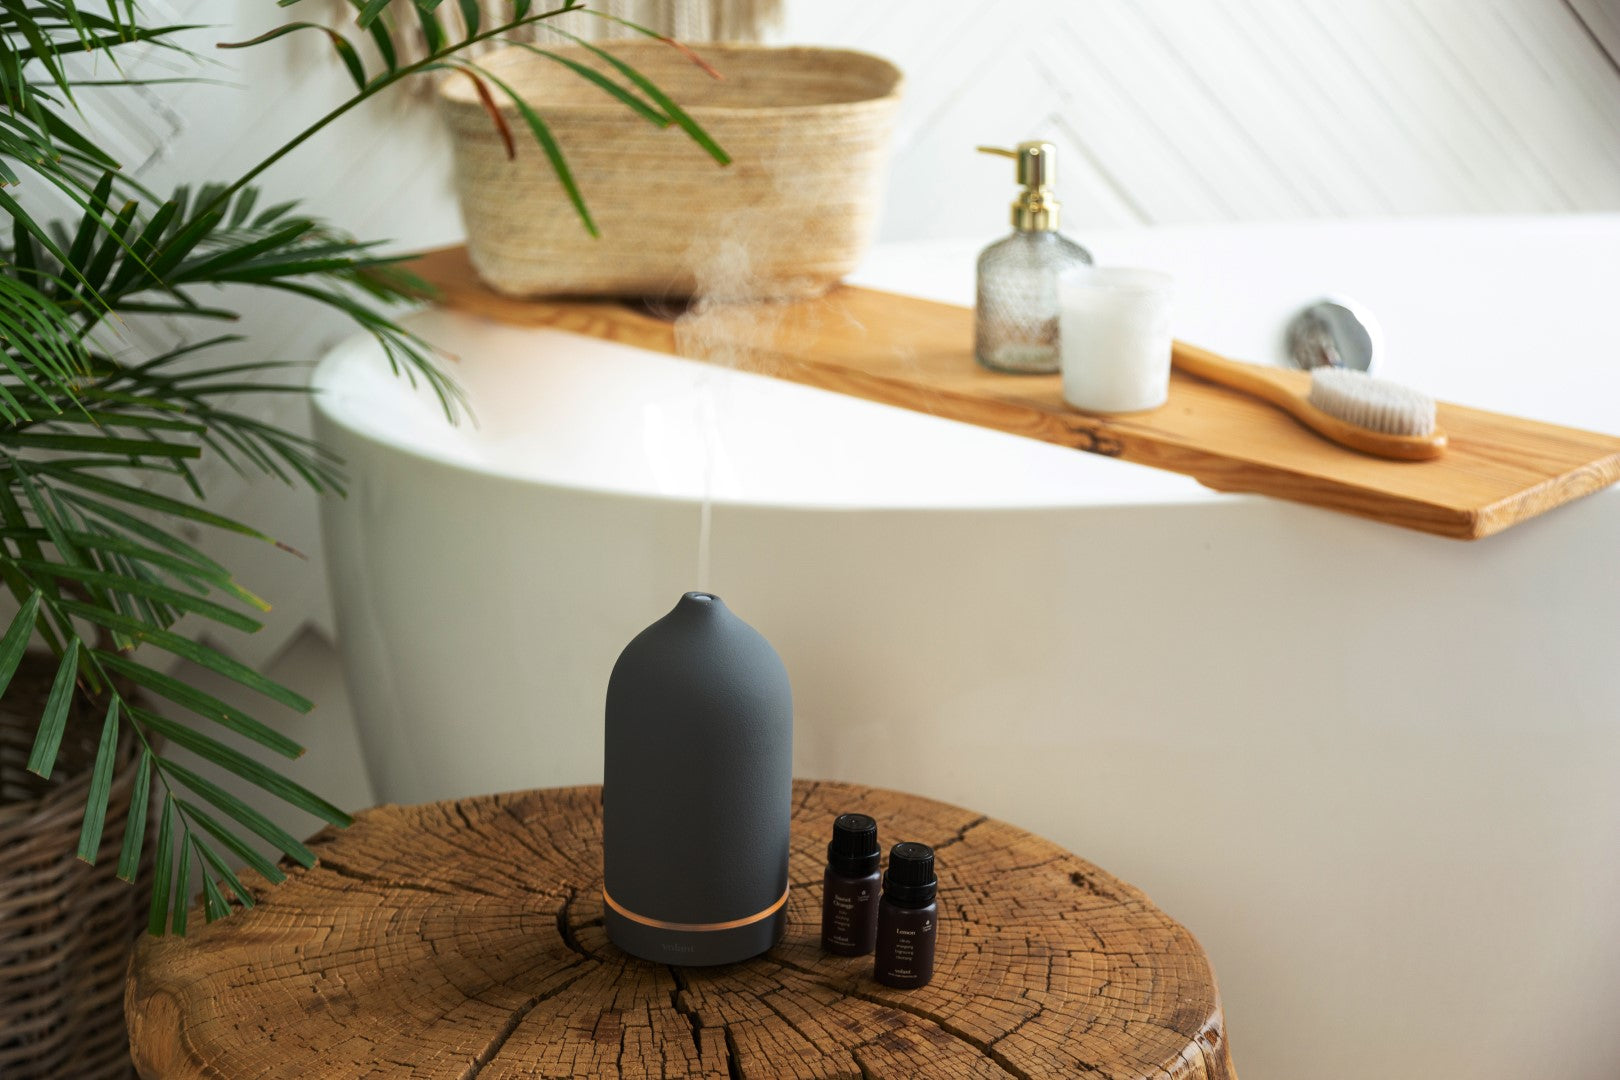 Eau de toilette with a difference: The benefits of using a diffuser in your bathroom